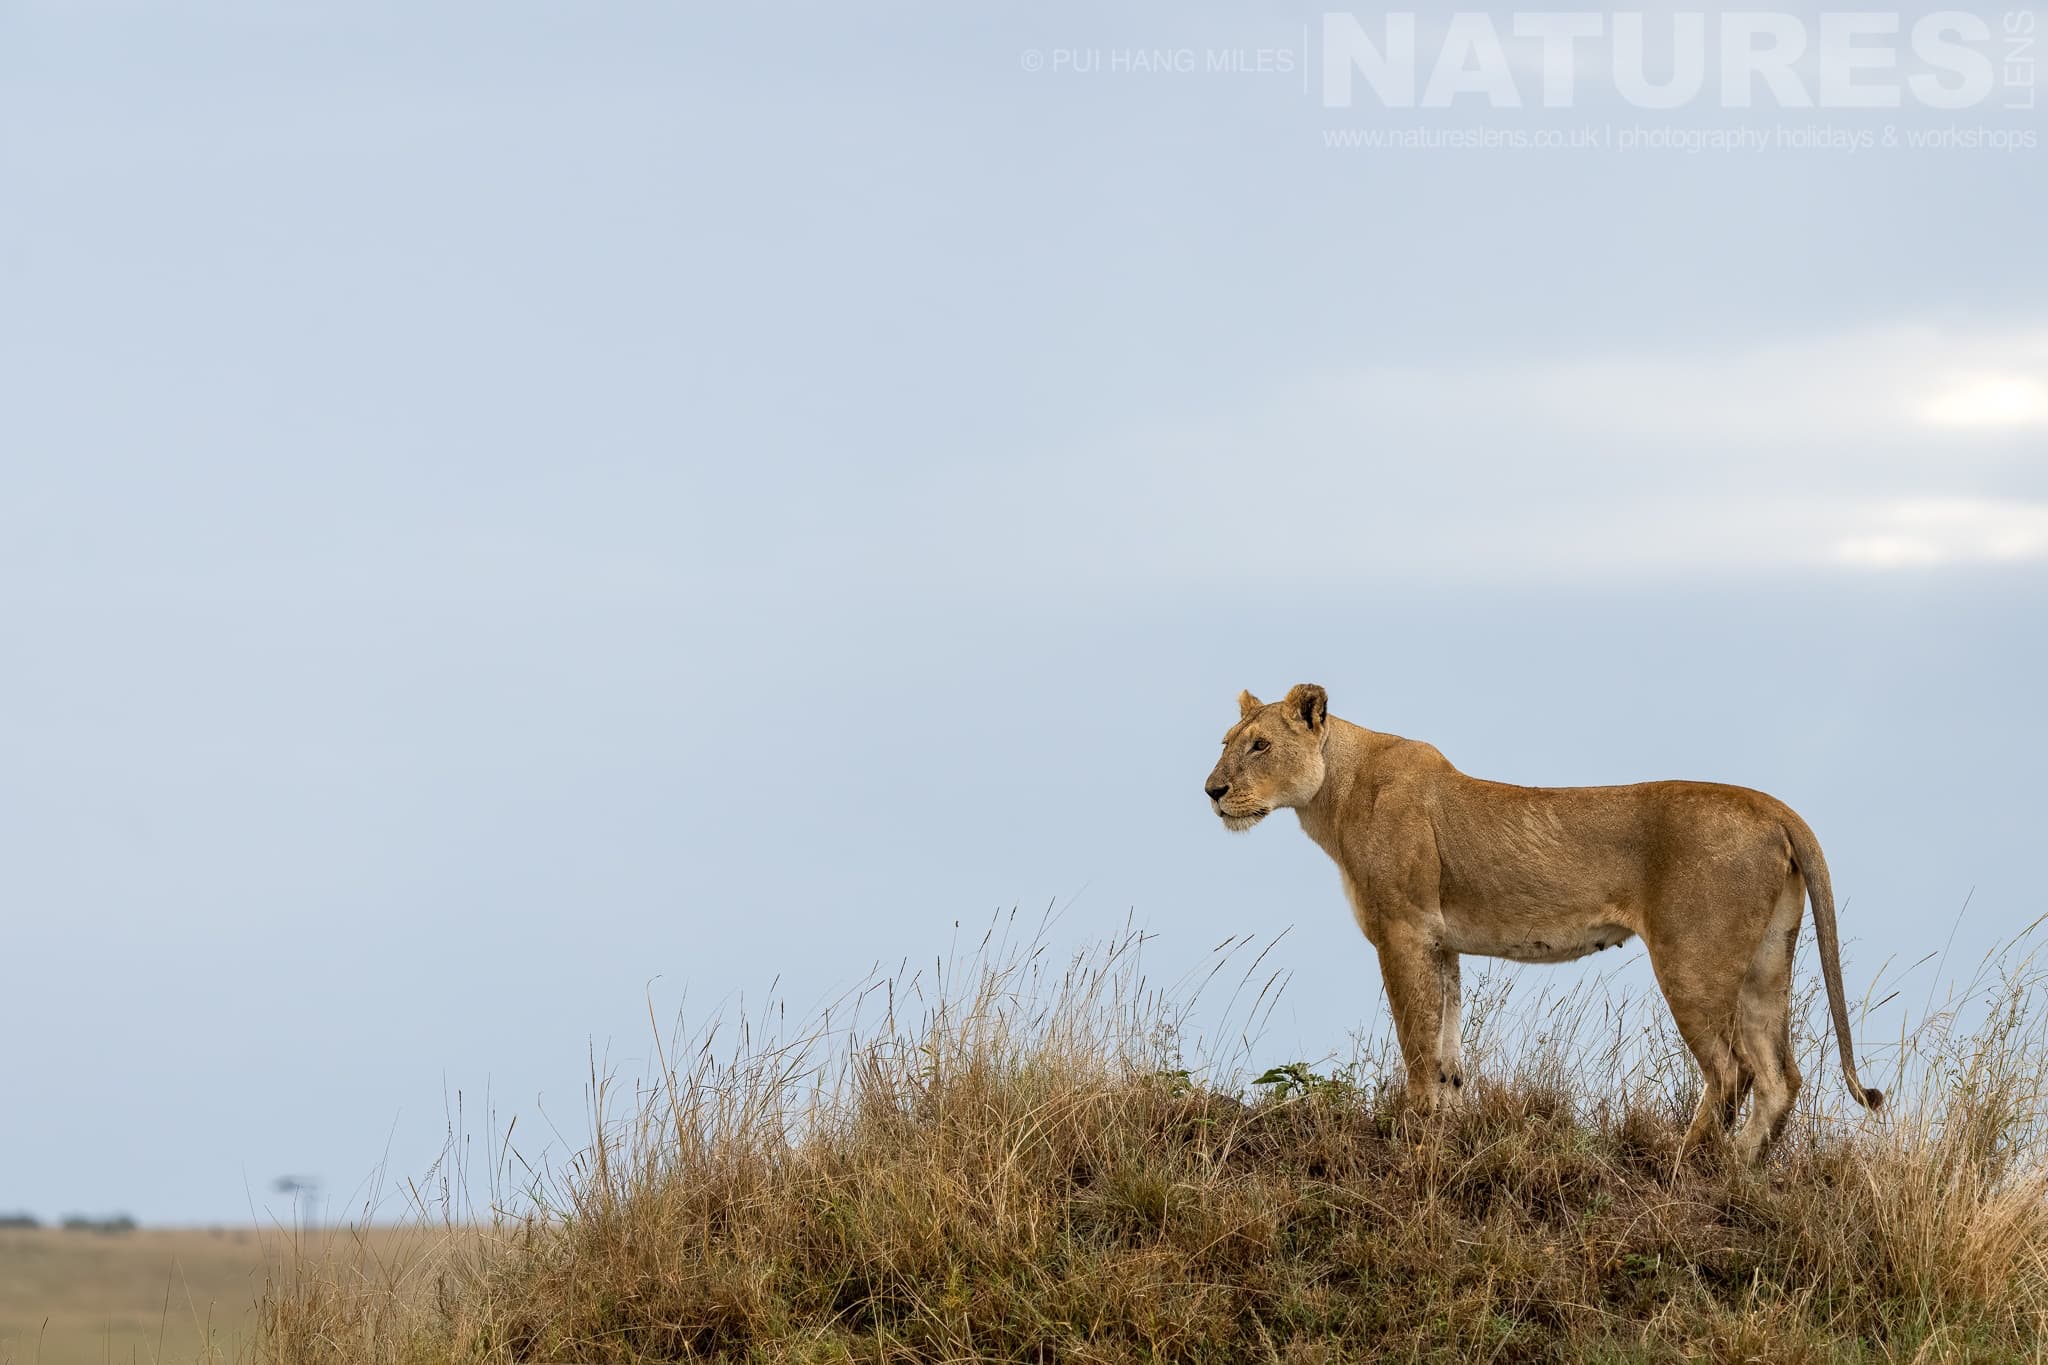 A Topi Pride Lioness Stood On A Vantage Point Photographed During A Natureslens Photography Holiday To Photograph The Wildlife Of The Maasai Mara